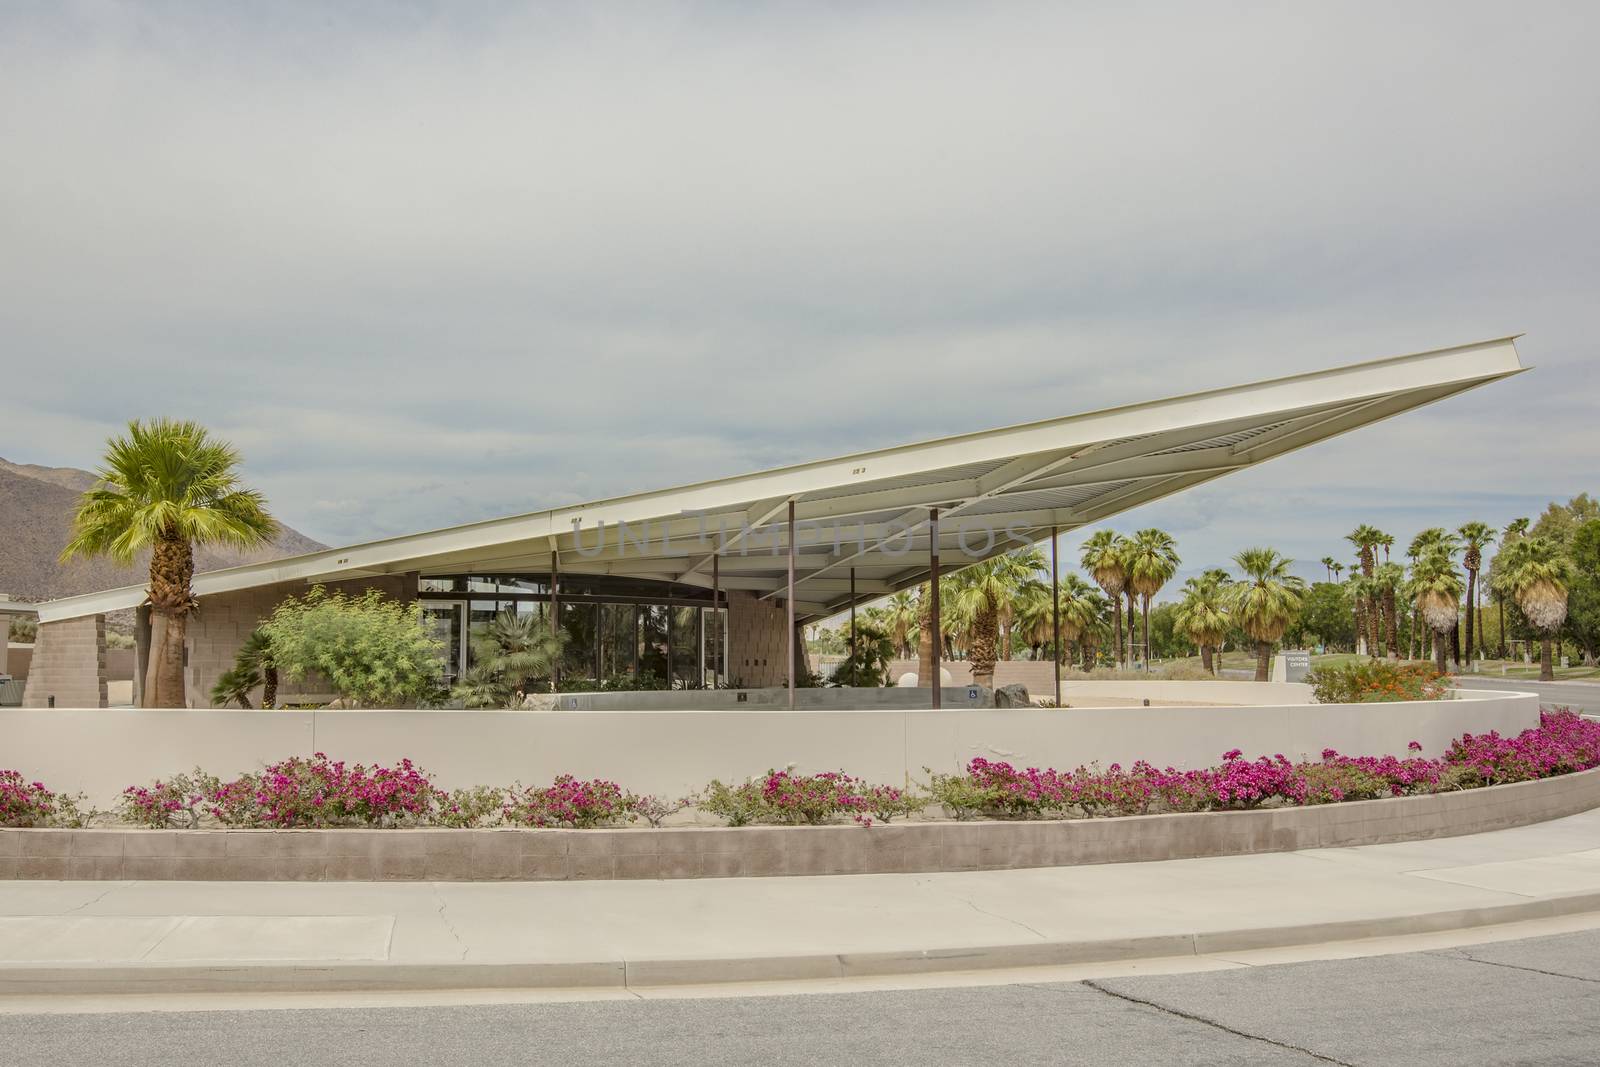 PALM SPRINGS, RIVERSIDE COUNTY, CALIFORNIA, USA - SEPTEMBER 20:  Historic mid century Tramway Gas Station designed by Albert Frey and Robson Chambers, now Palm Springs Visitor Center, on September 20, 2015 in Palm Springs, California, USA.